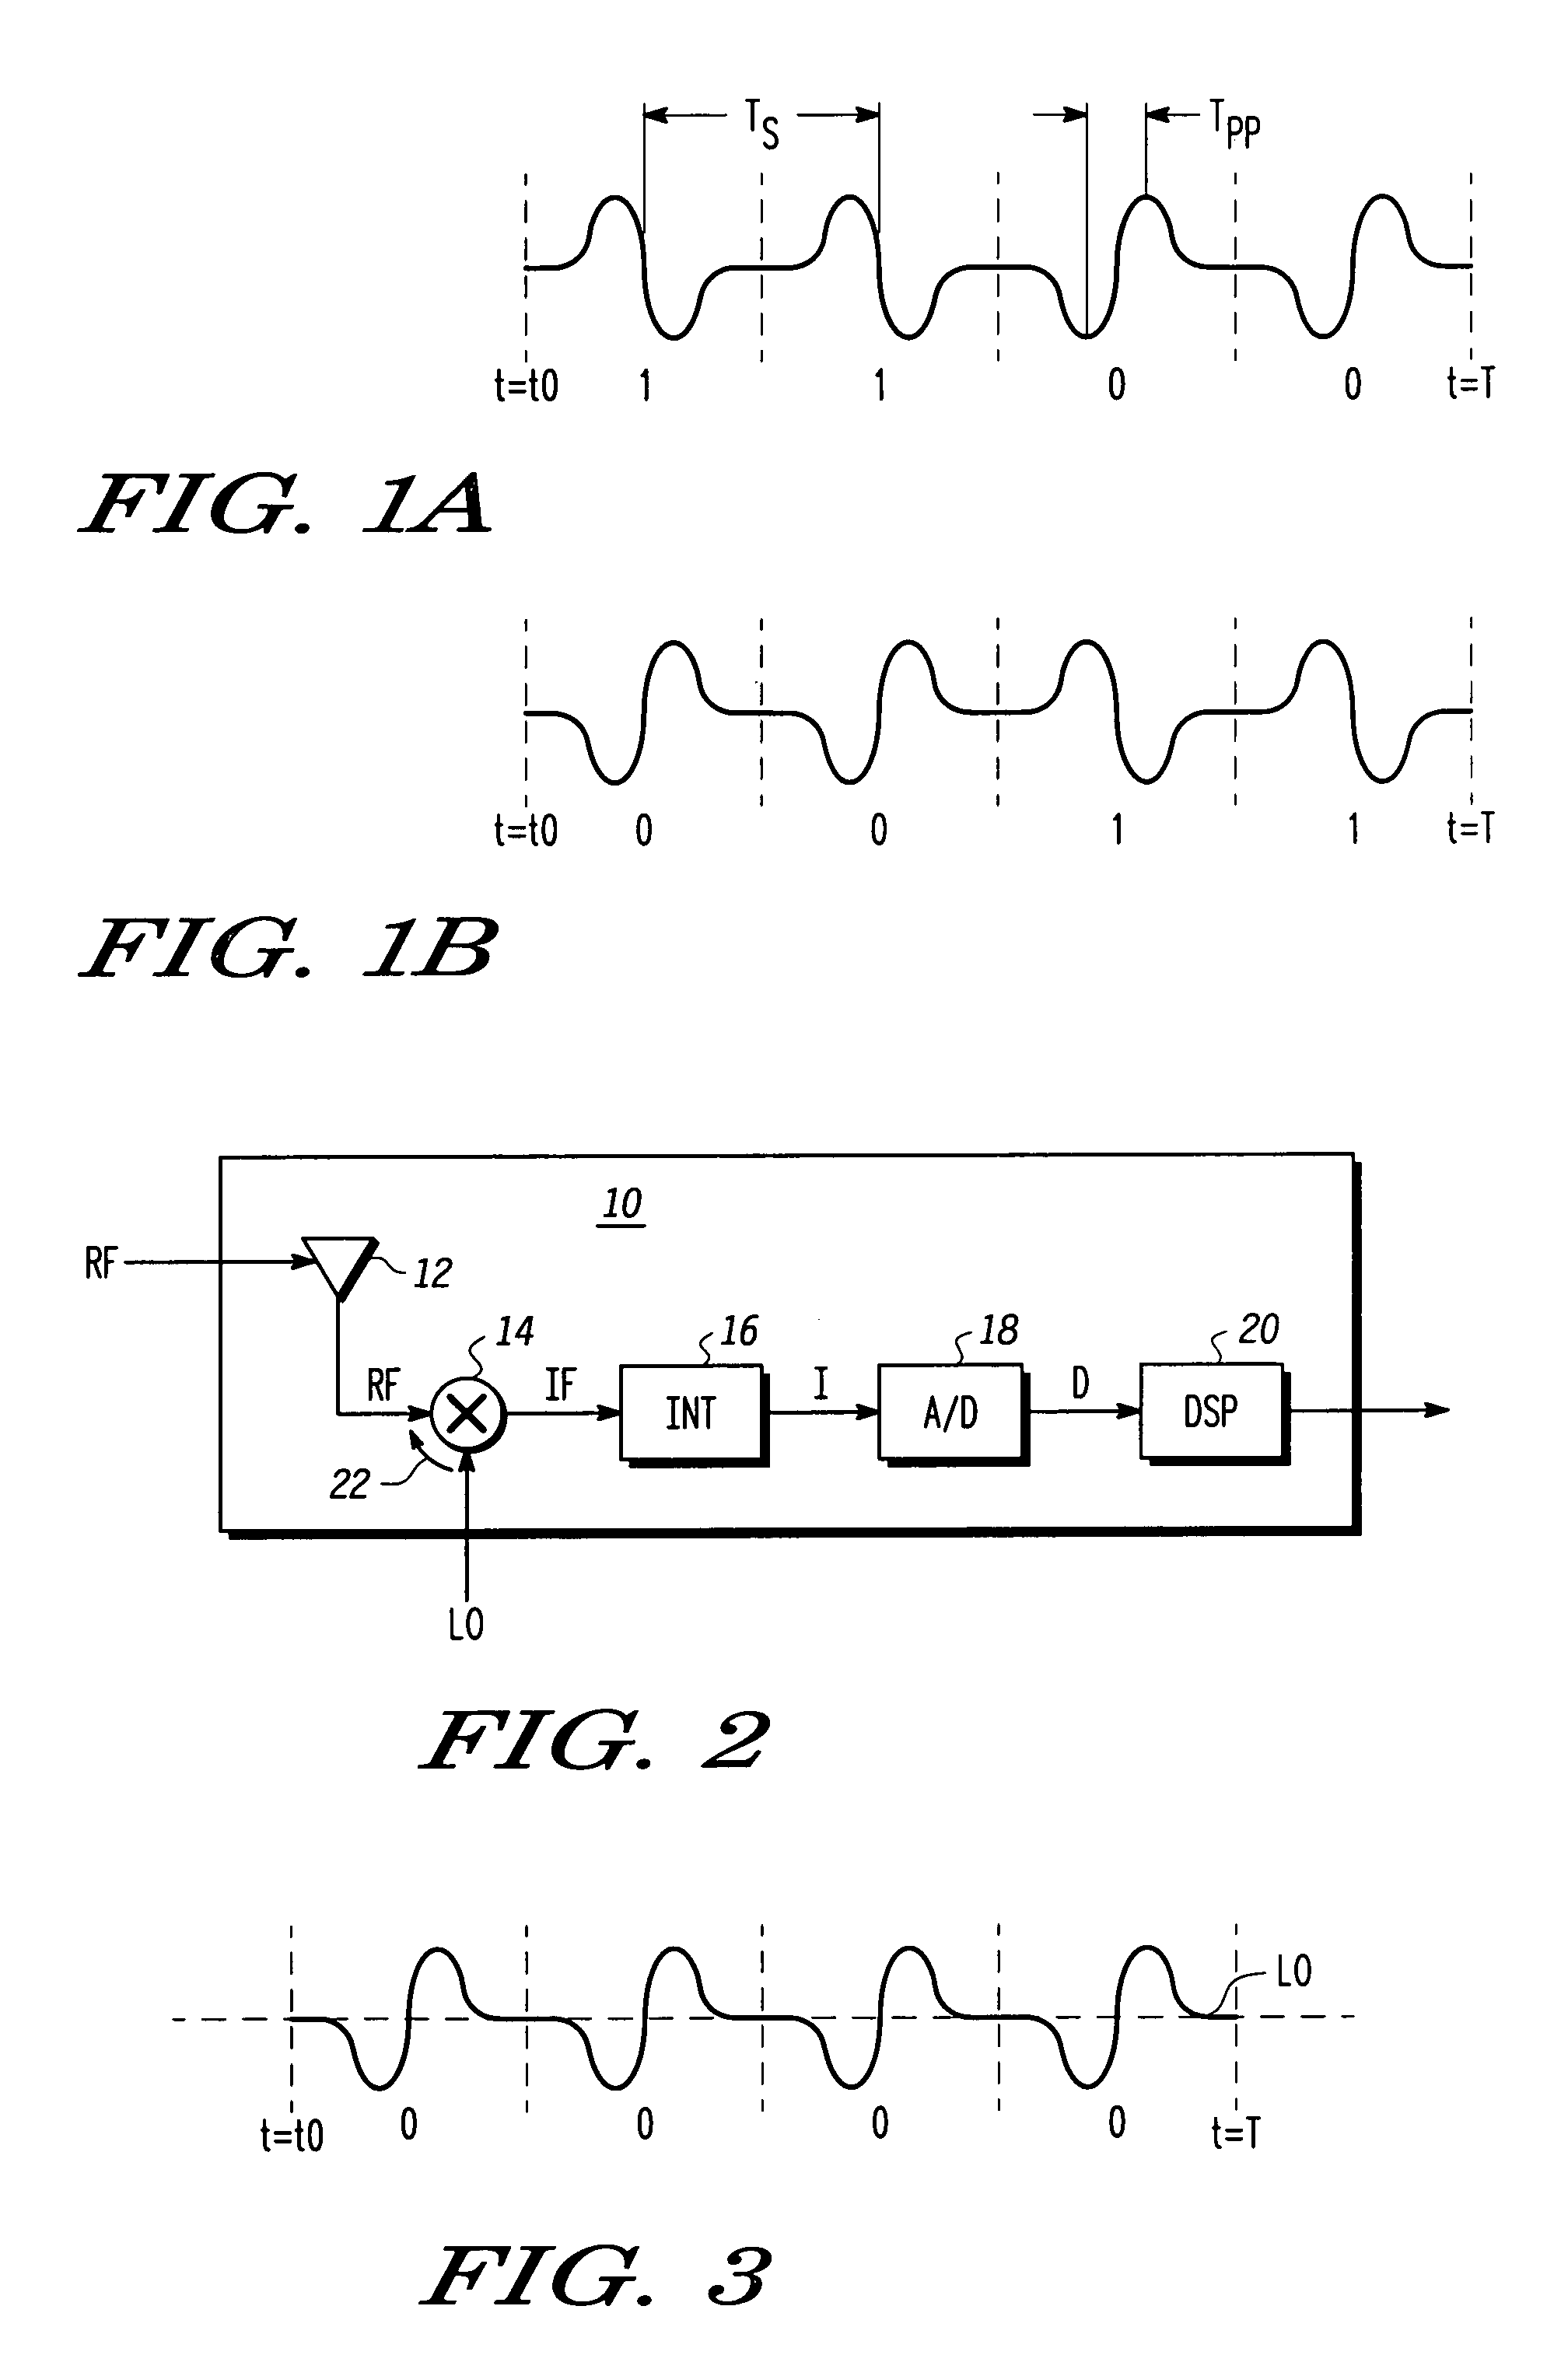 Leakage nulling receiver correlator structure and method for ultra wide bandwidth communication system